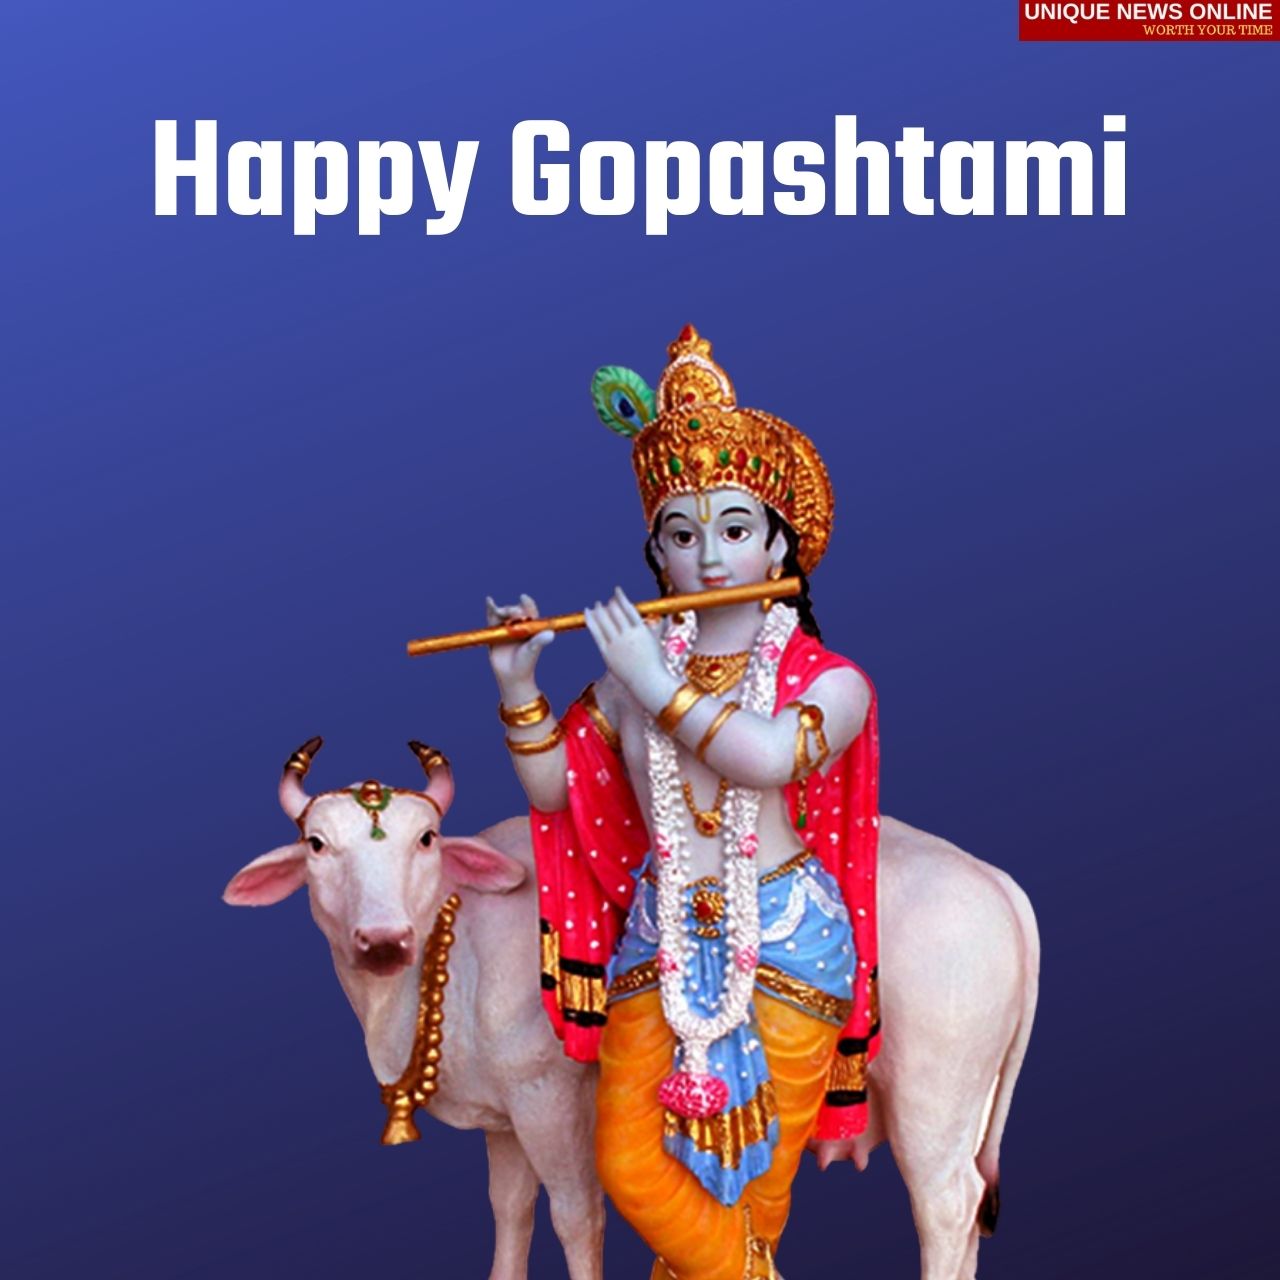 Happy Gopashtami 2021 Wishes, Greetings, Messages, HD Images, and Quotes to Share